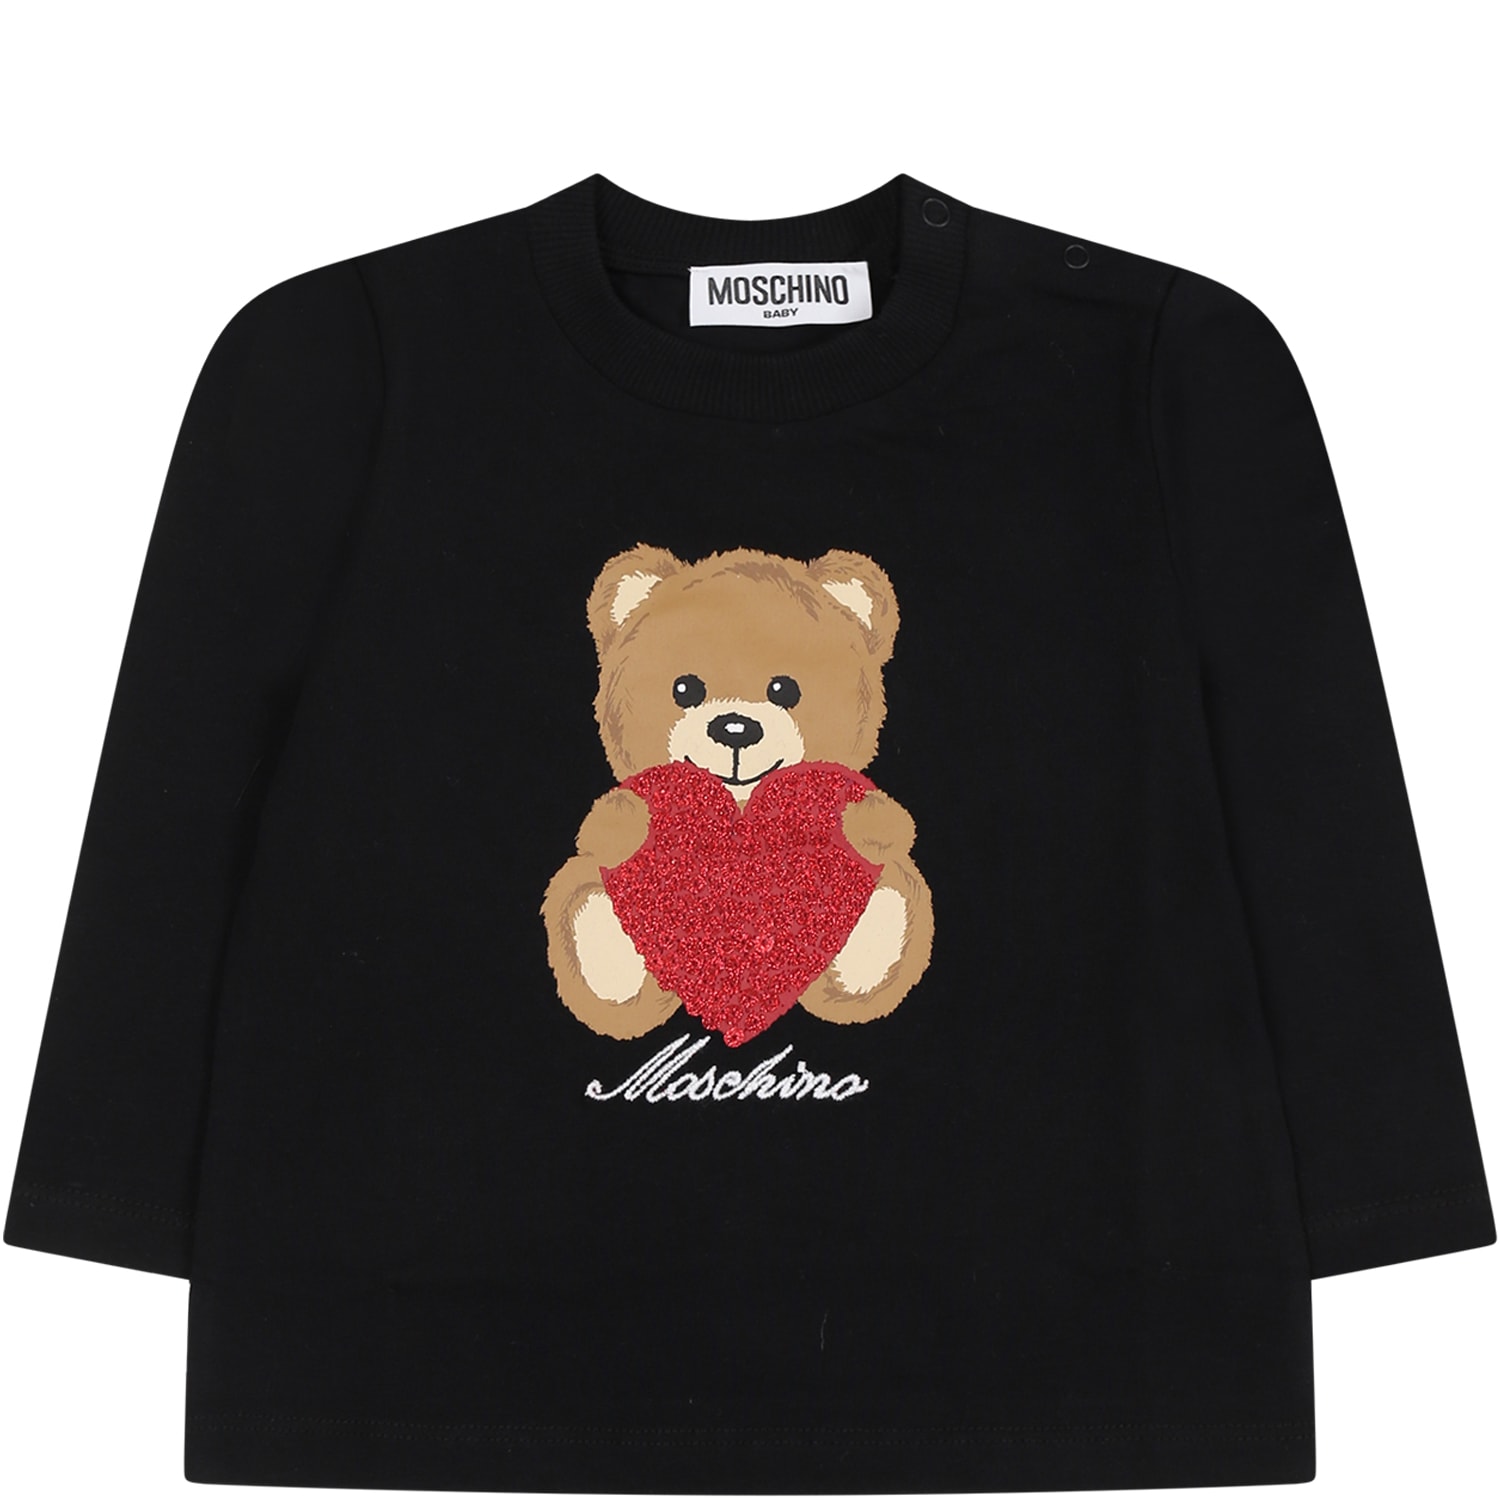 Moschino Black T-shirt For Baby Girl With Teddy Bear And Hearts